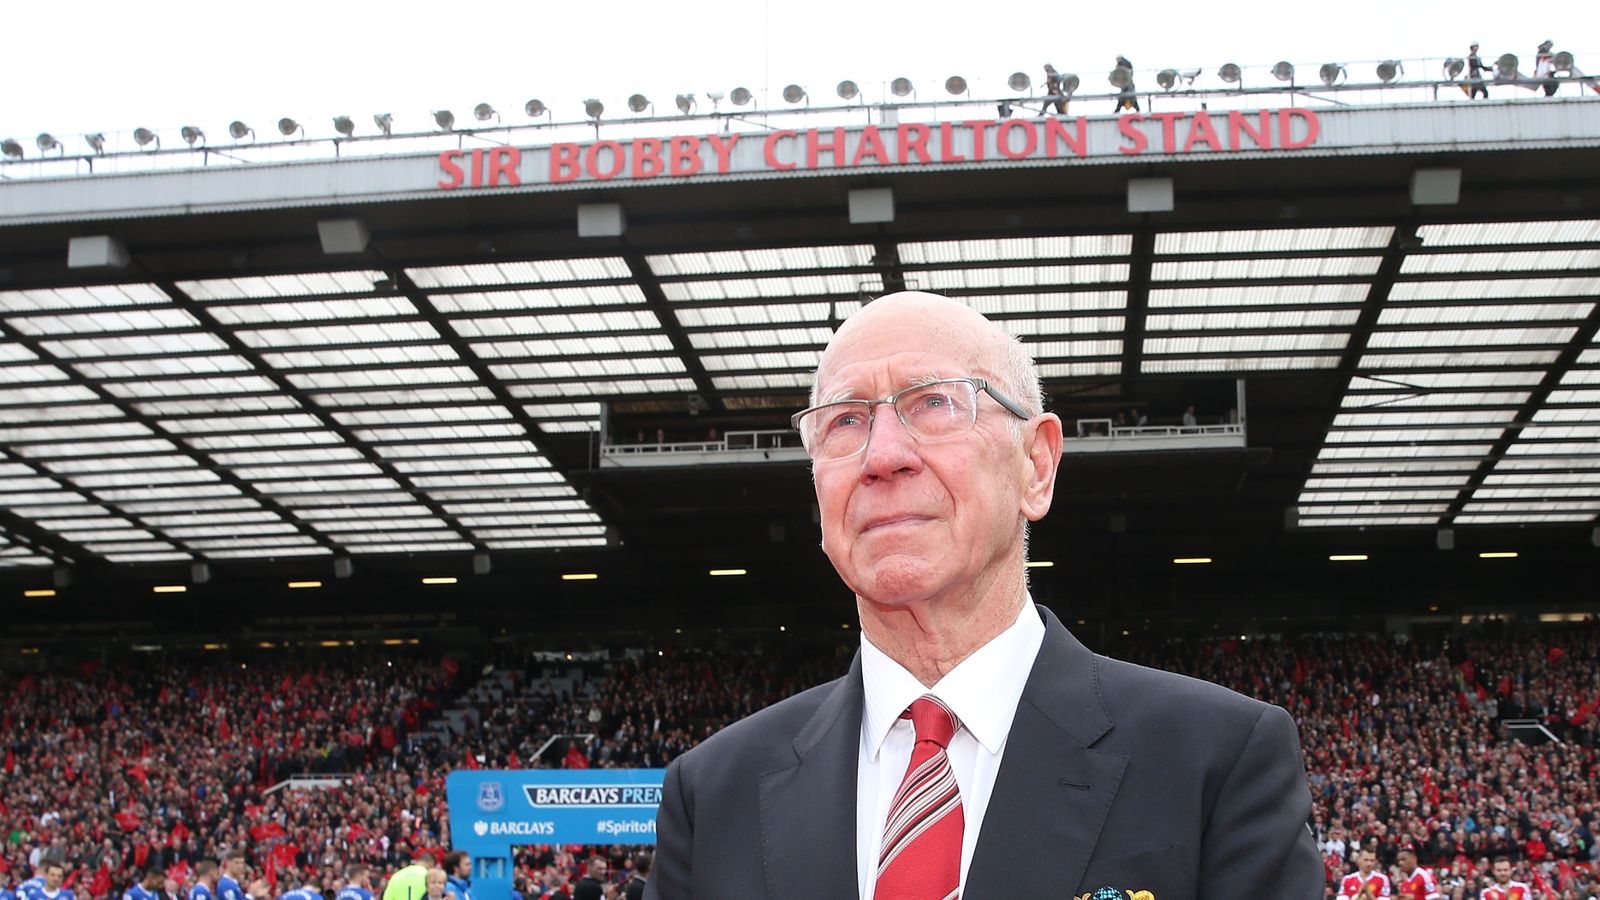 Manchester United and England legend Sir Bobby Charlton turns 80